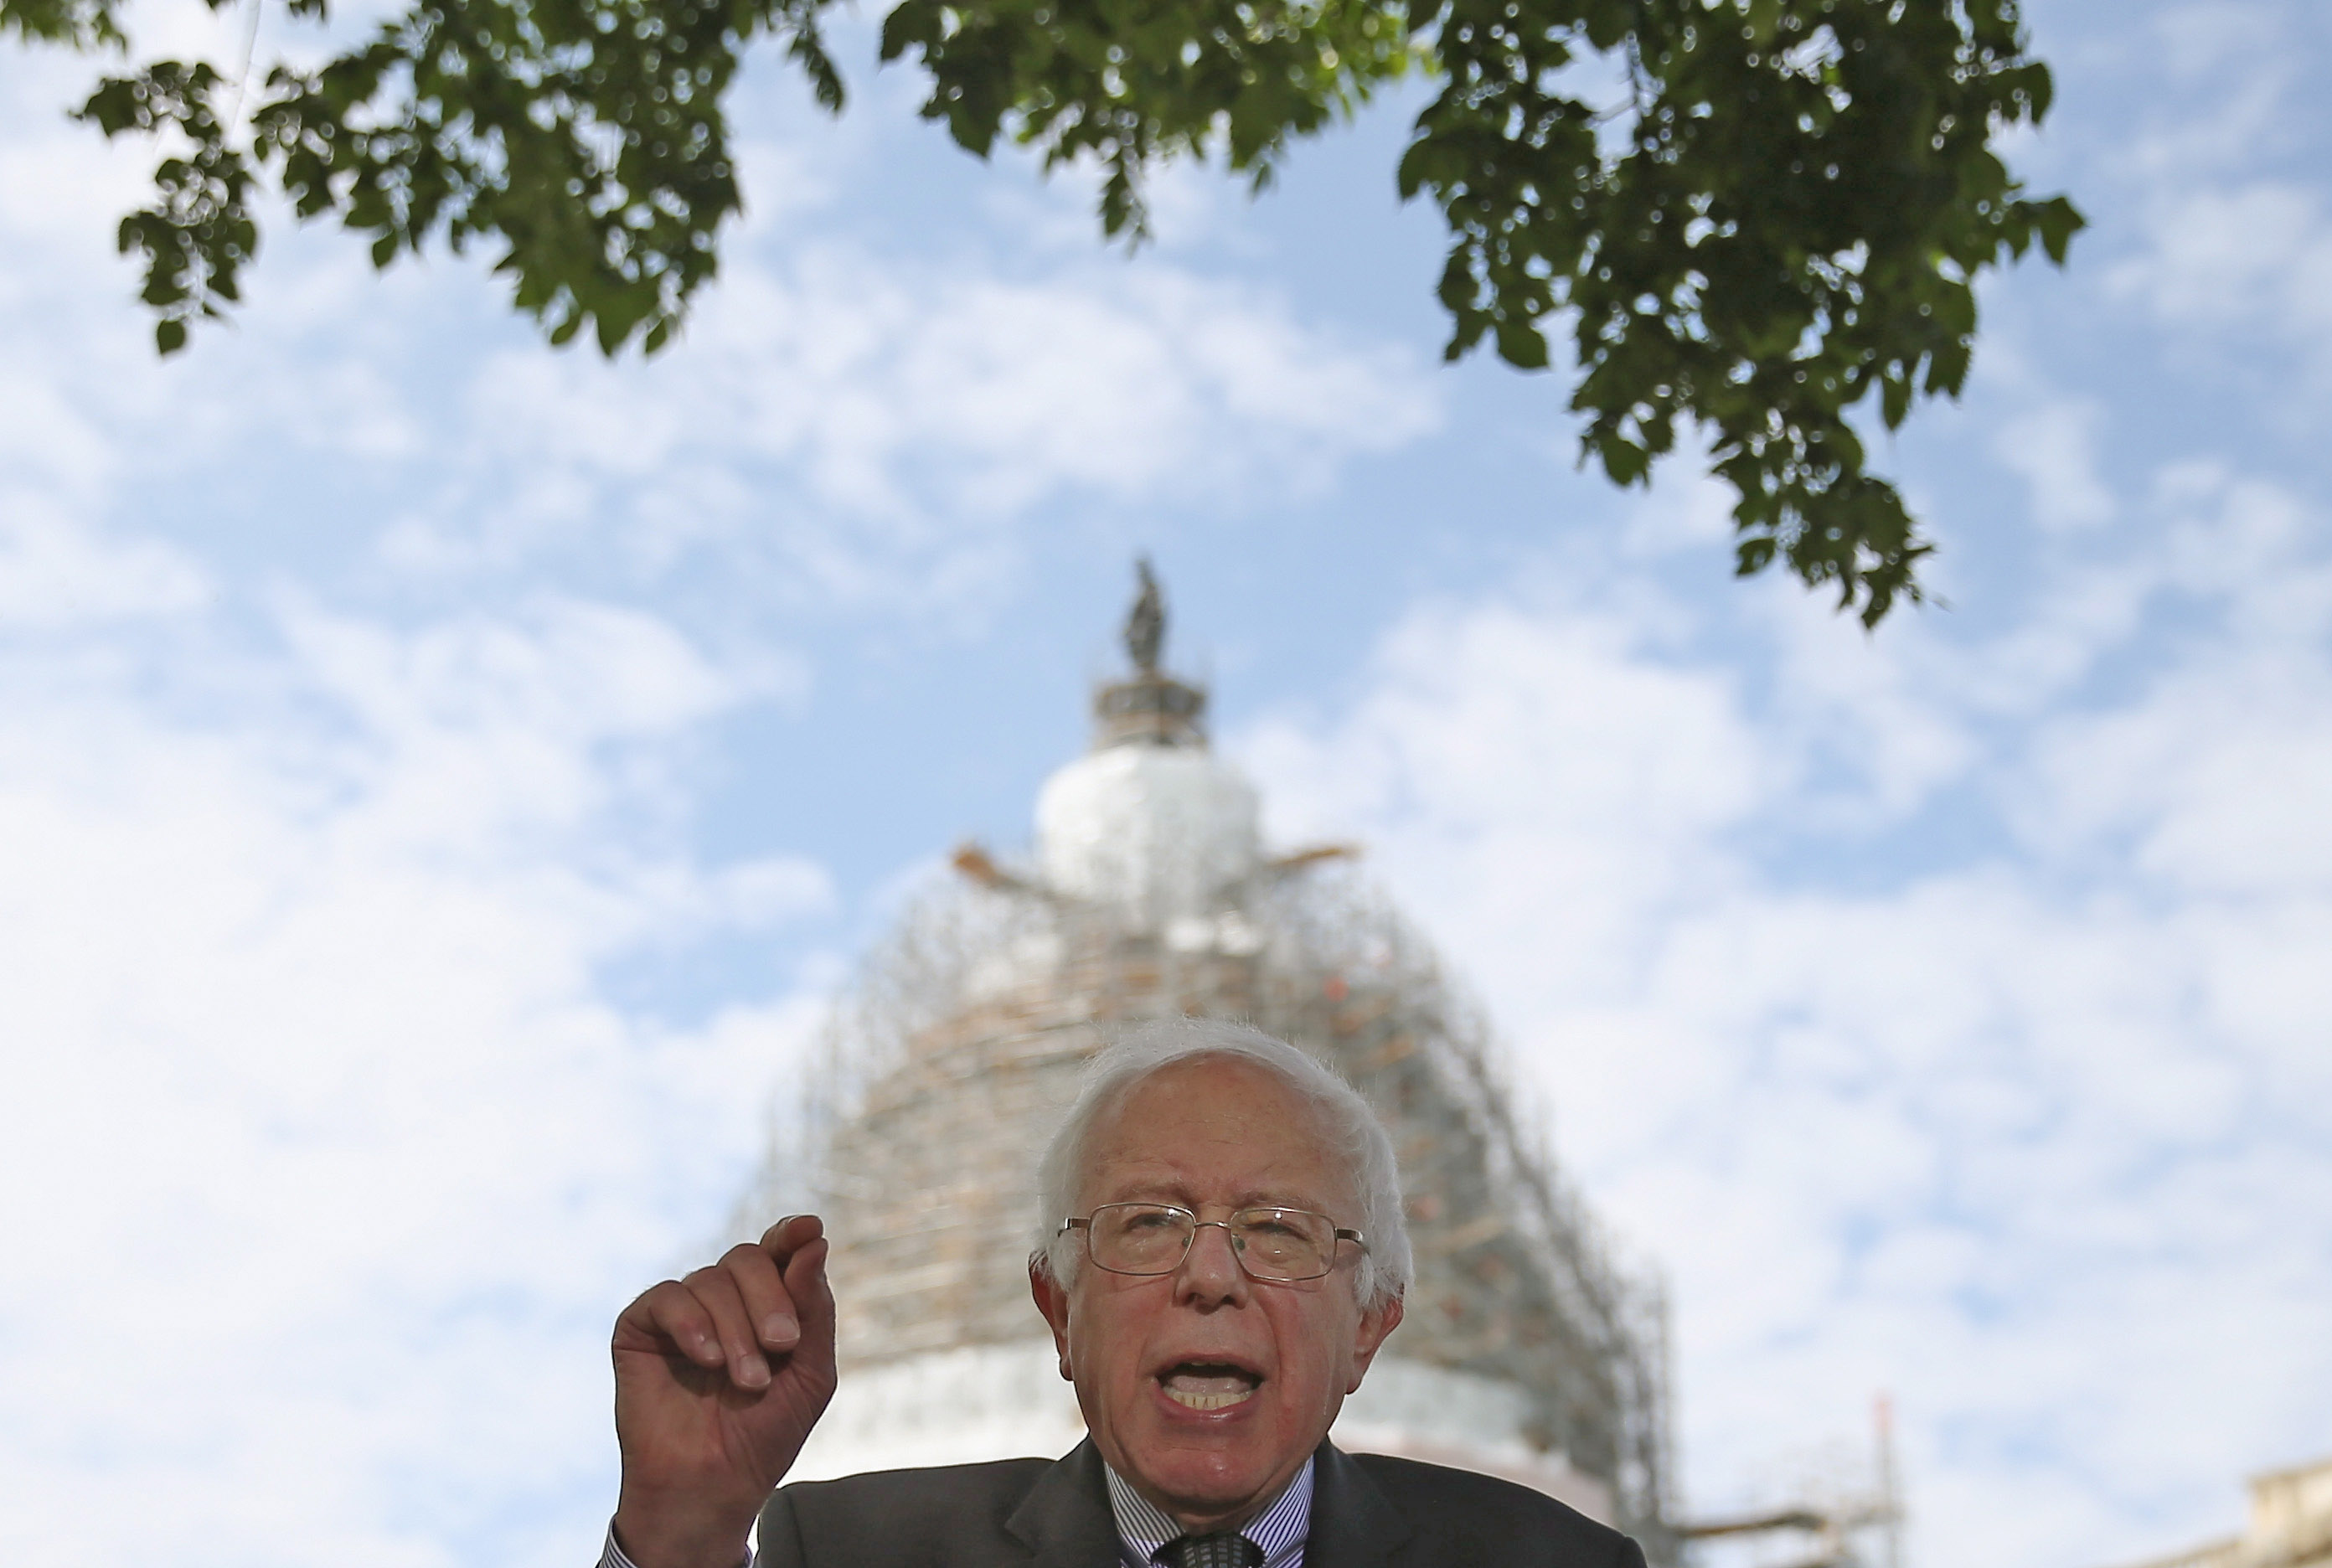 Sen. Bernie Sanders (I-VT) speaks about college tuitions during a news conference on Capitol Hill May 19, 2015 in Washington, DC. (Mark Wilson&mdash;Getty Images)